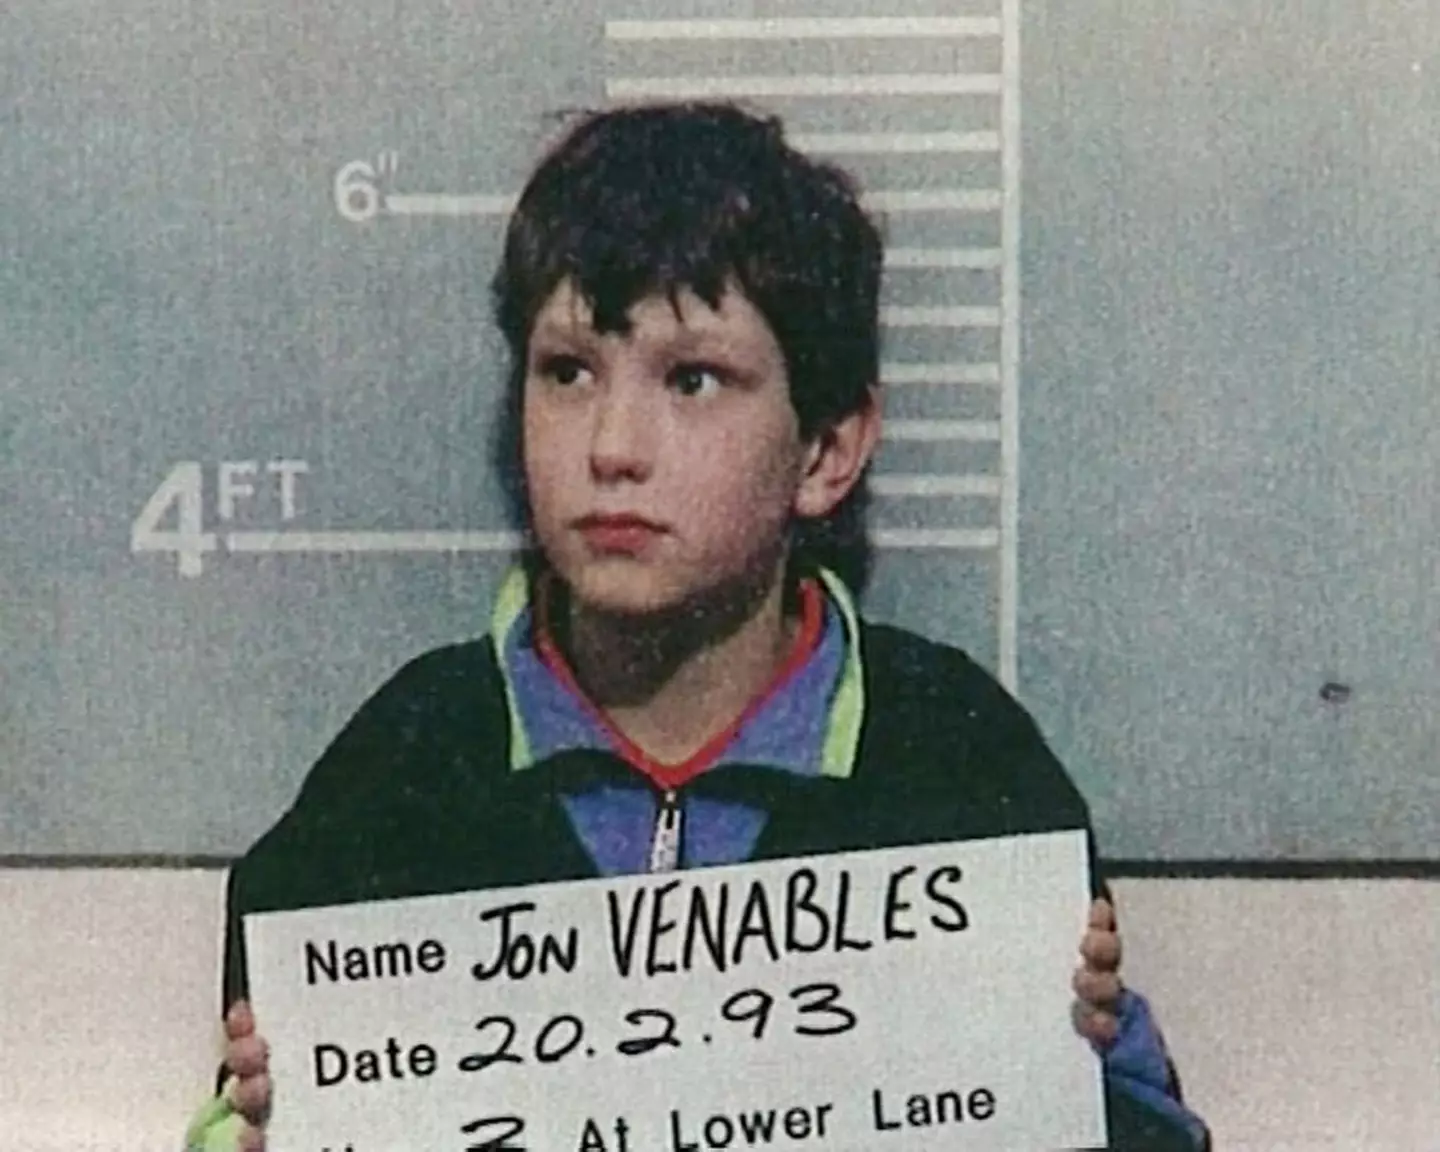 John Venables was one of the children who abducted and killed James Bulger.